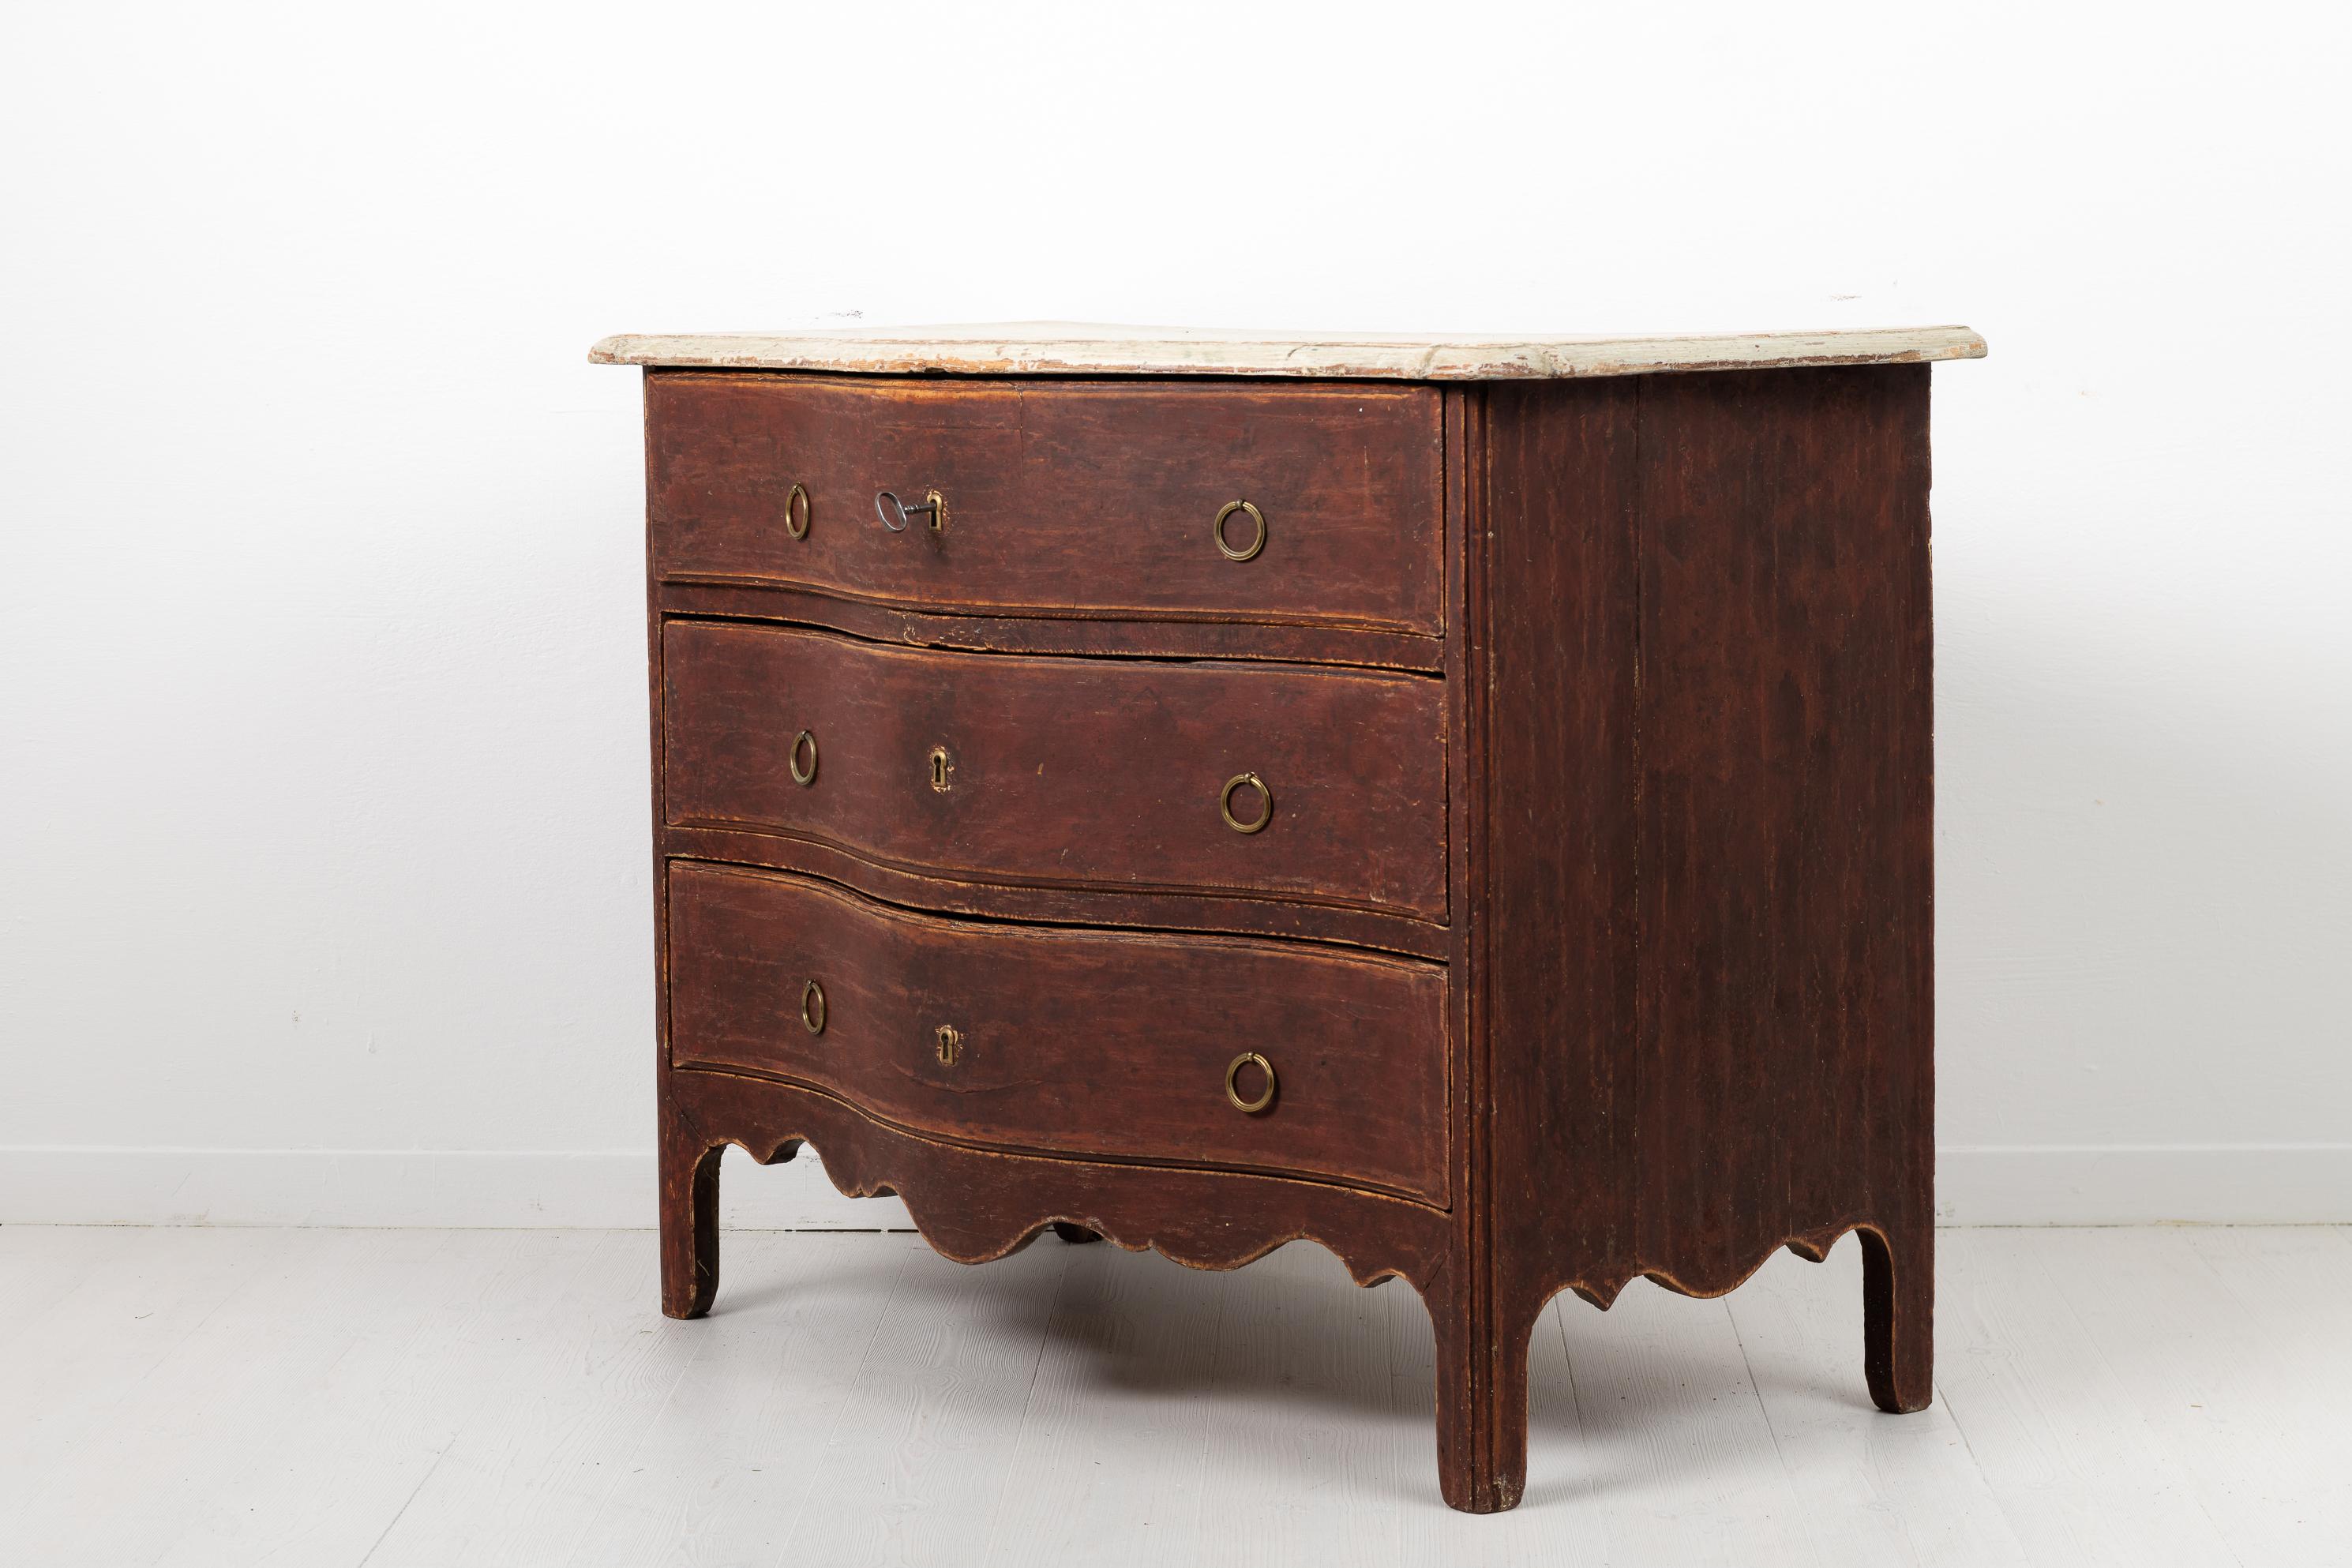 Hand-Crafted 18th Century Swedish Pine Baroque Chest of Drawers